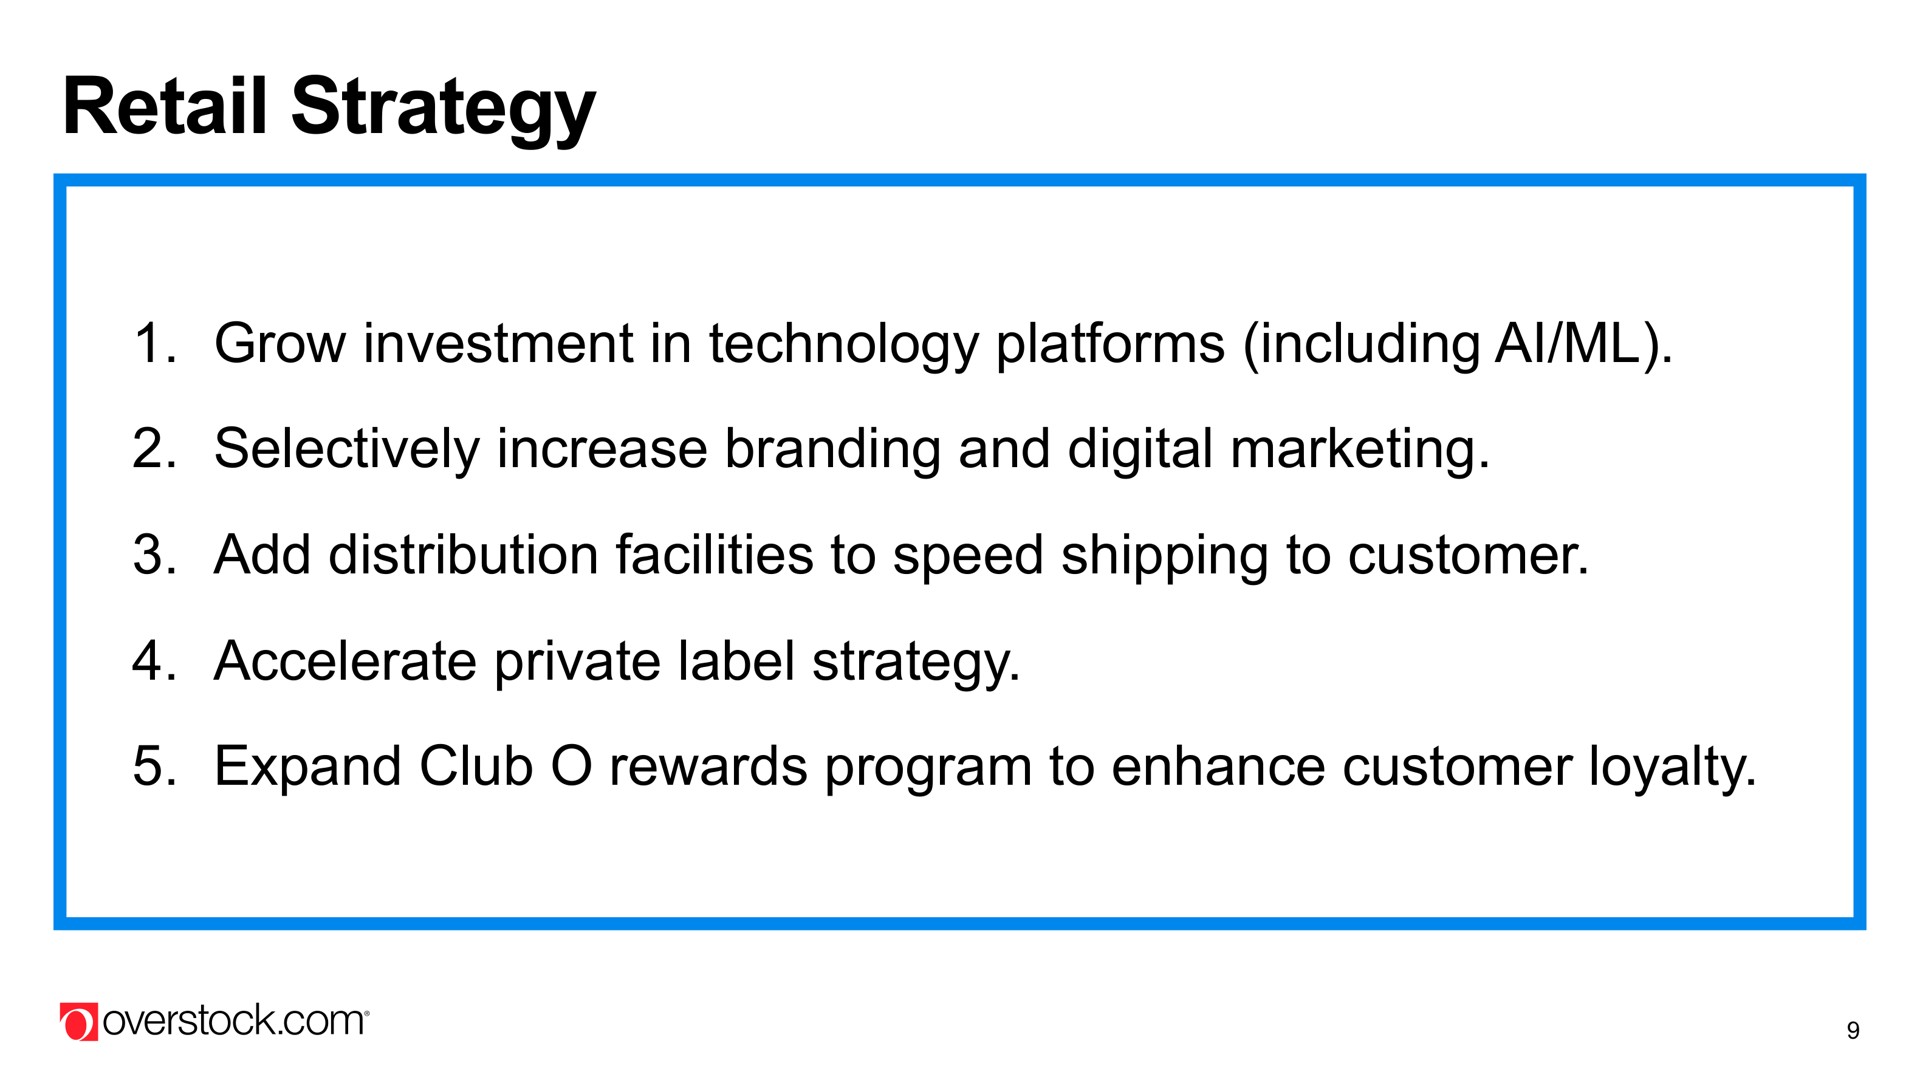 retail strategy grow investment in technology platforms including selectively increase branding and digital marketing add distribution facilities to speed shipping to customer accelerate private label strategy expand club rewards program to enhance customer loyalty | Overstock